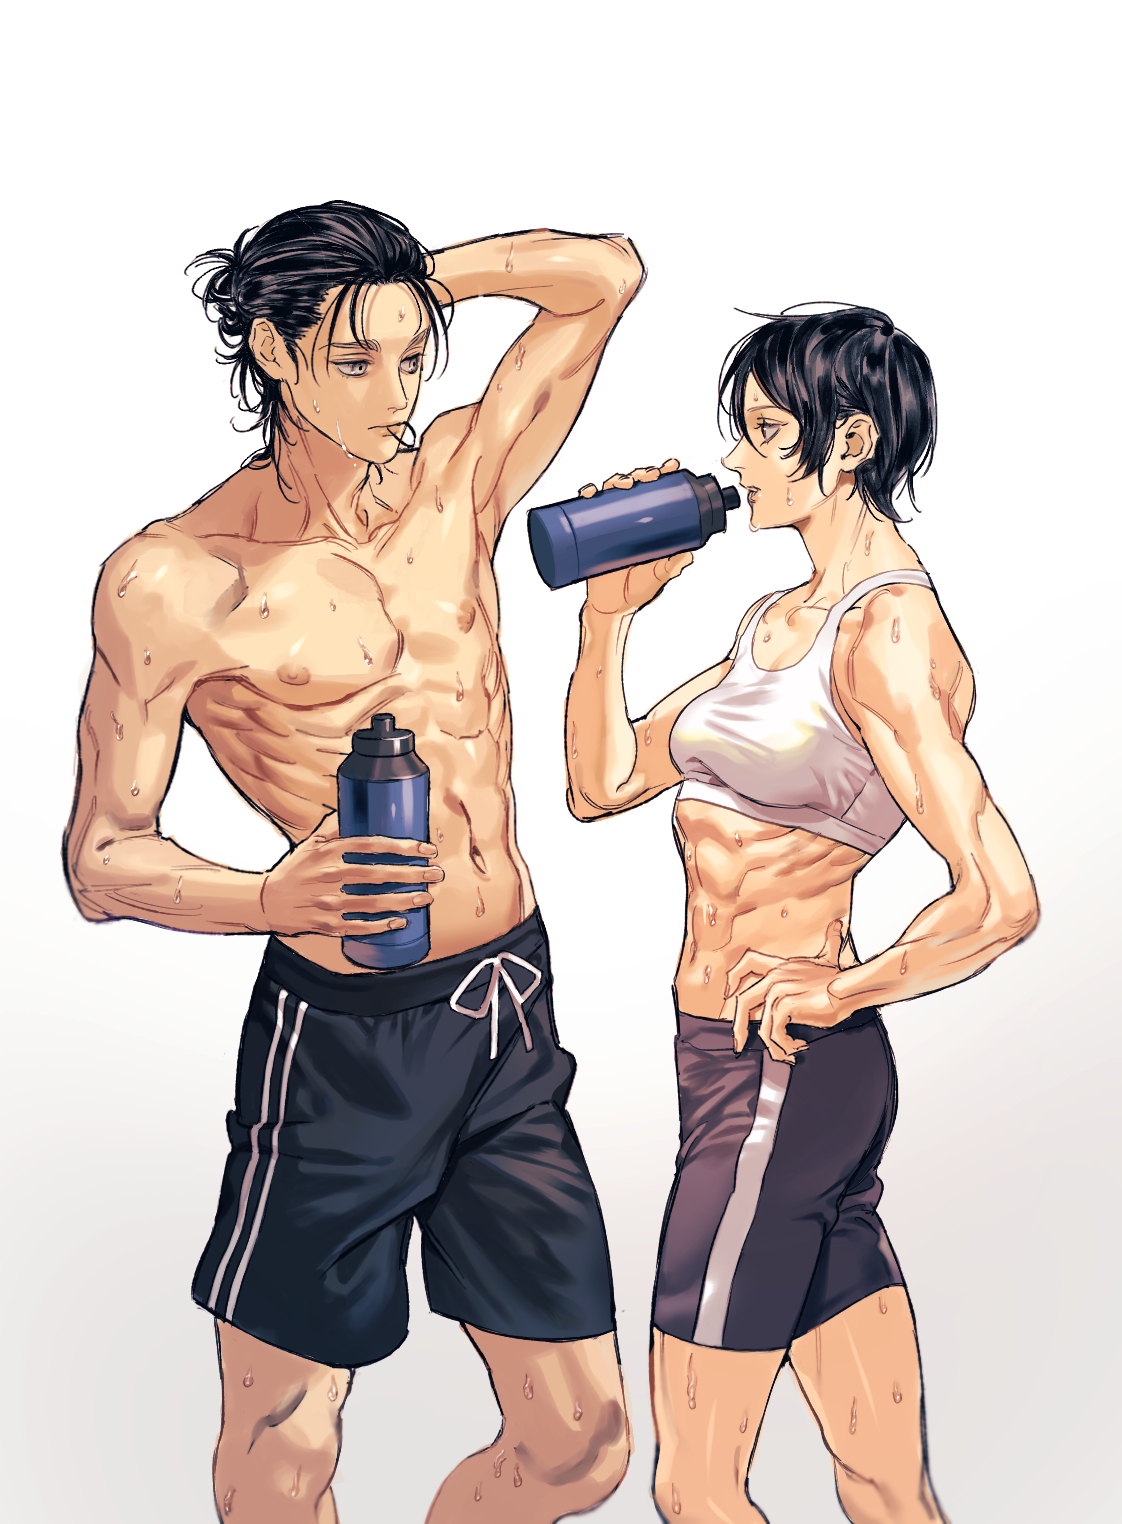 Anime 1122x1524 Shingeki no Kyojin messy hair tied hair simple background anime girls anime boys muscles 6-pack abs biceps black shorts drink training bare shoulders parted lips hair in face 2D anime black eyes gray eyes Mikasa Ackerman Eren Jeager short hair black hair long hair hands on hips touching hair couple fan art